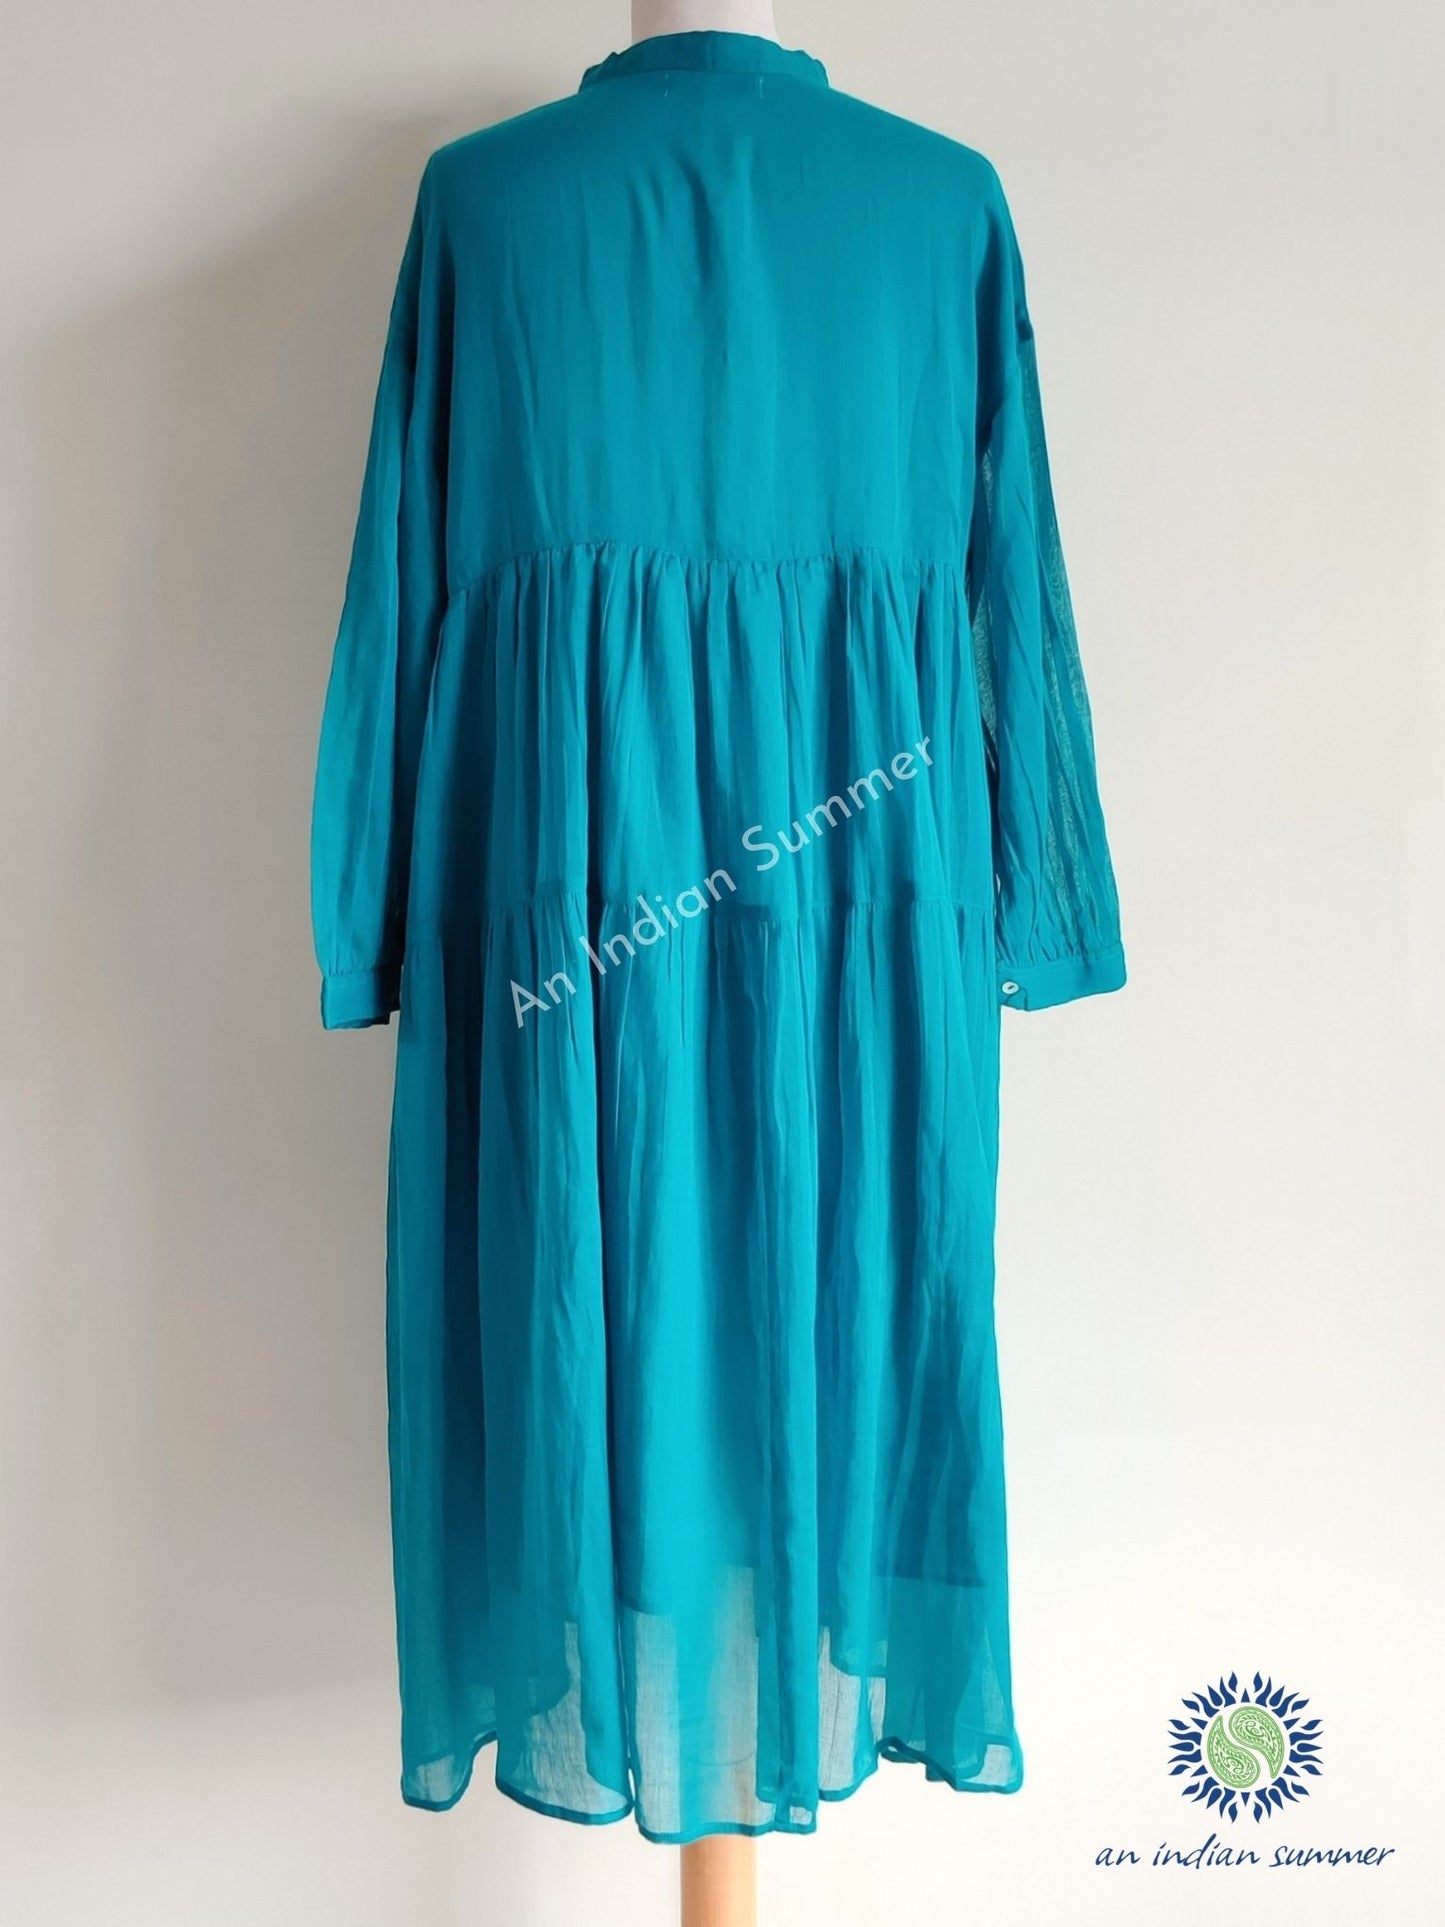 Peacock Blue | Nitya Dress | Plain Cotton Dress Self Lined with Pockets | Cotton Voile | An Indian Summer | Seasonless Timeless Sustainable Ethical Authentic Artisan Conscious Clothing Lifestyle Brand